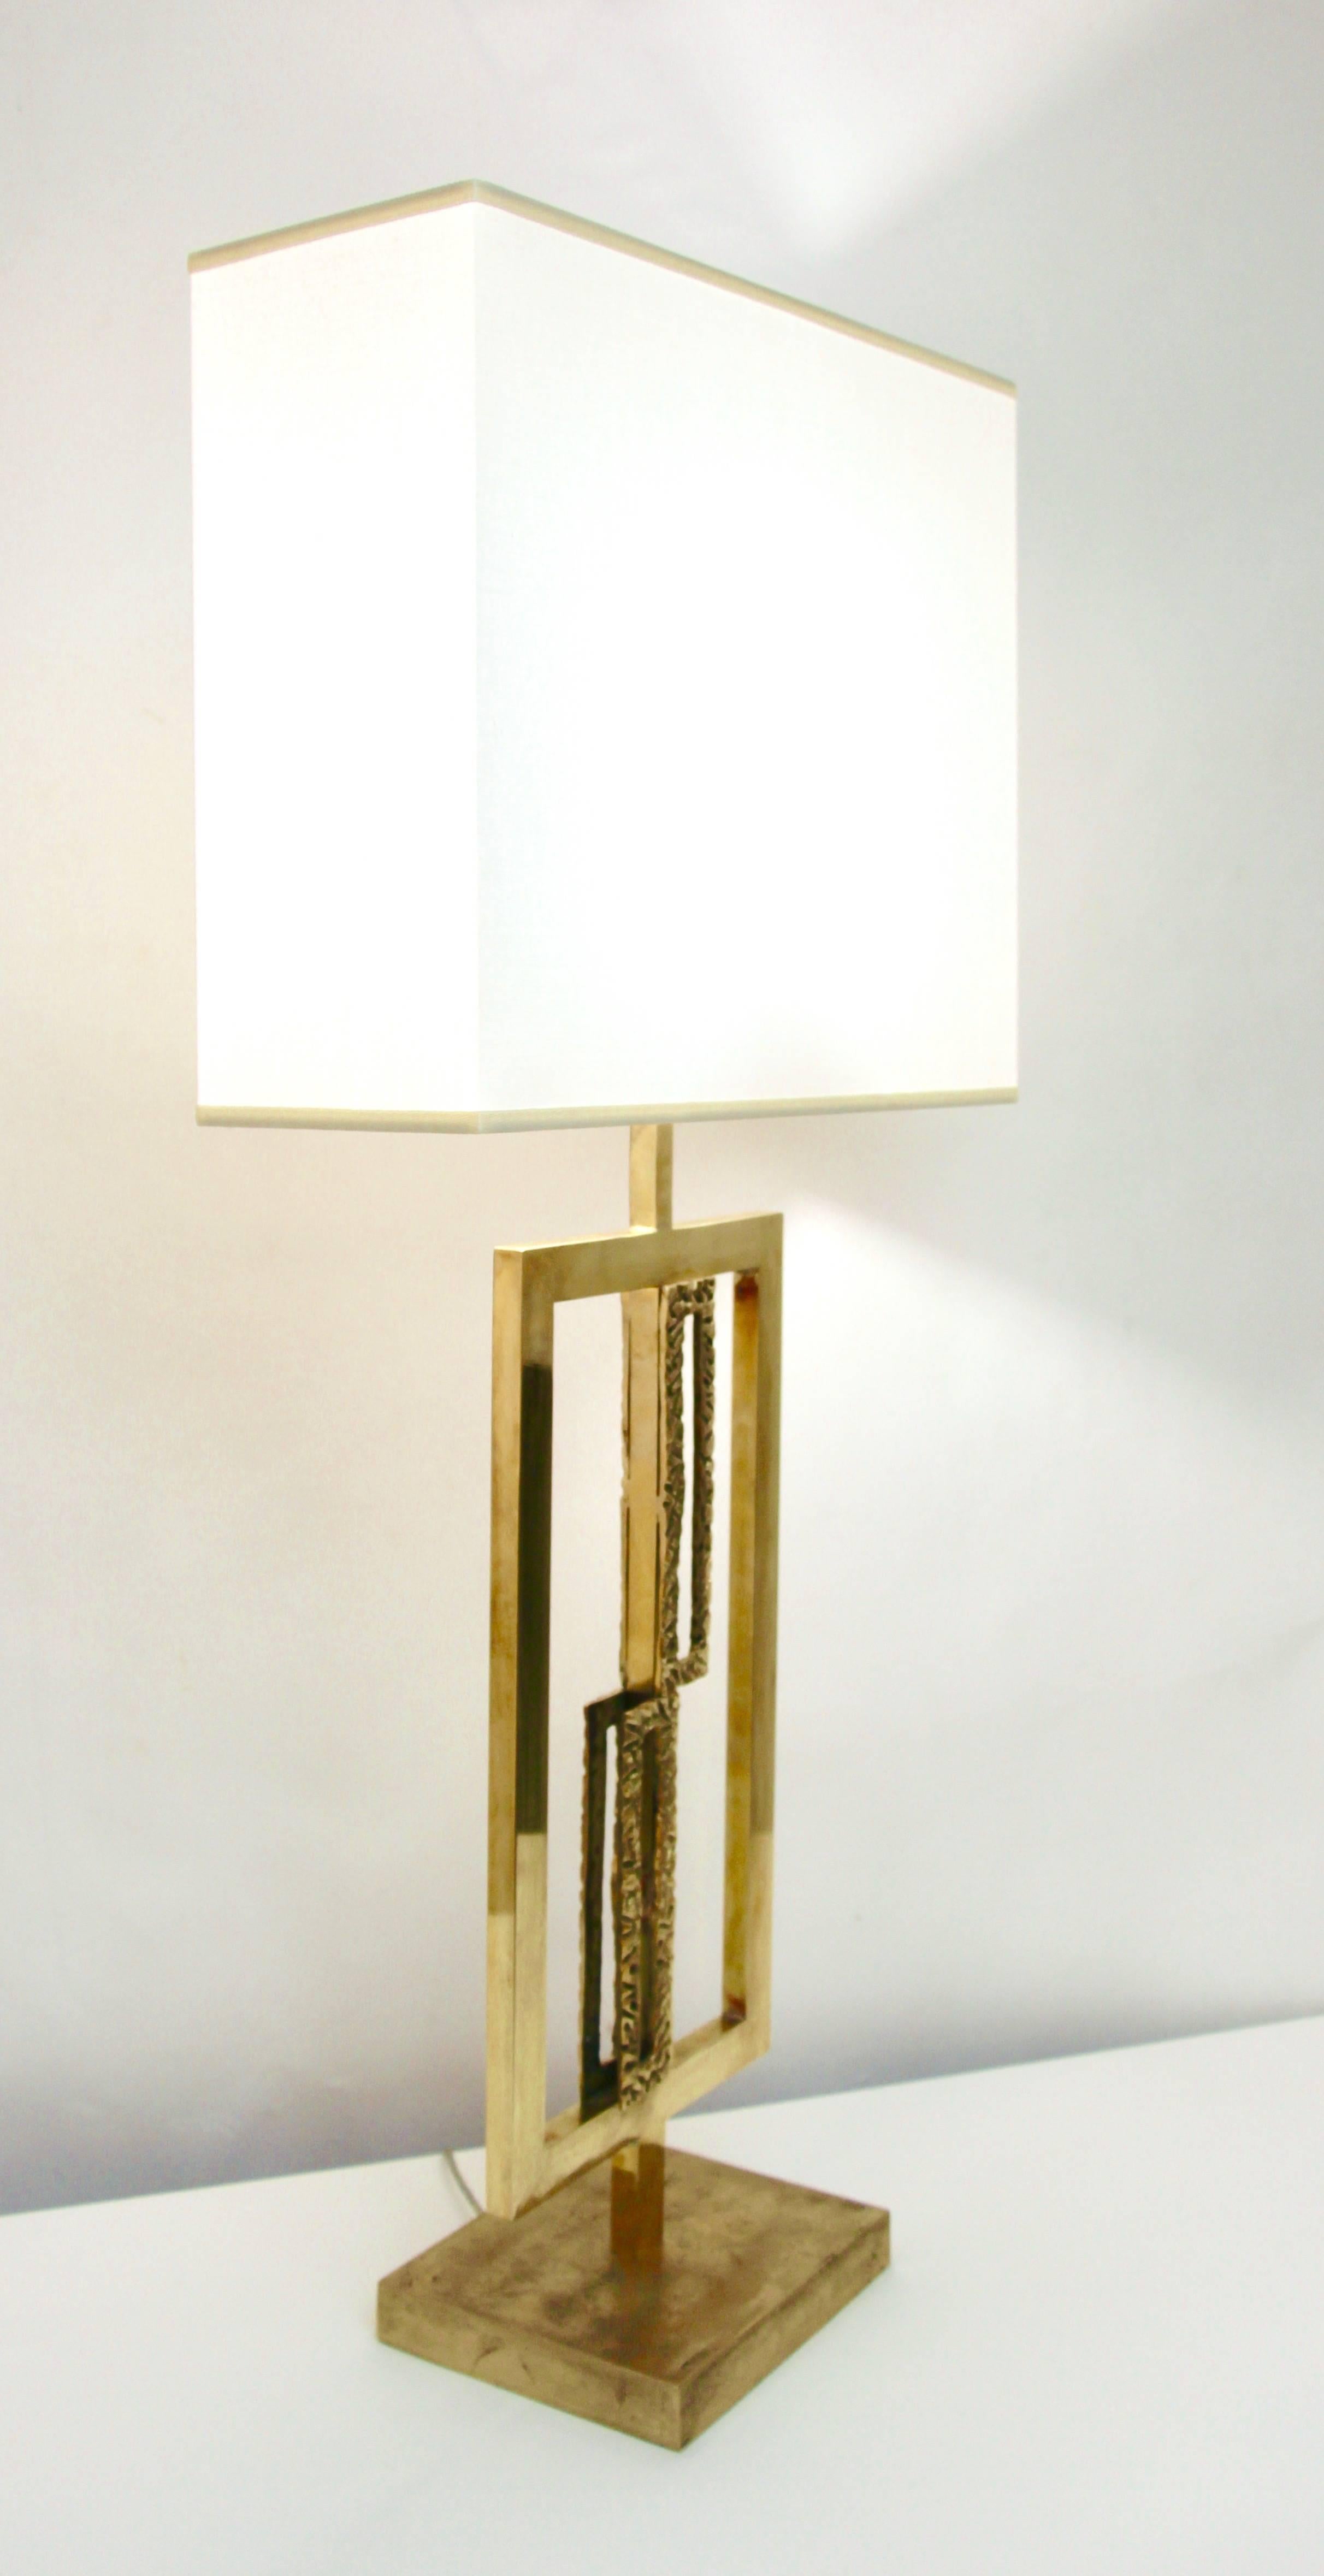 This exclusive pair of Italian pierced sculpture lamps with white shades are entirely handmade, with modern geometric design, the gold brass rectangular open frame encloses two geometrical perforated elements in cast bronze with a nice depth